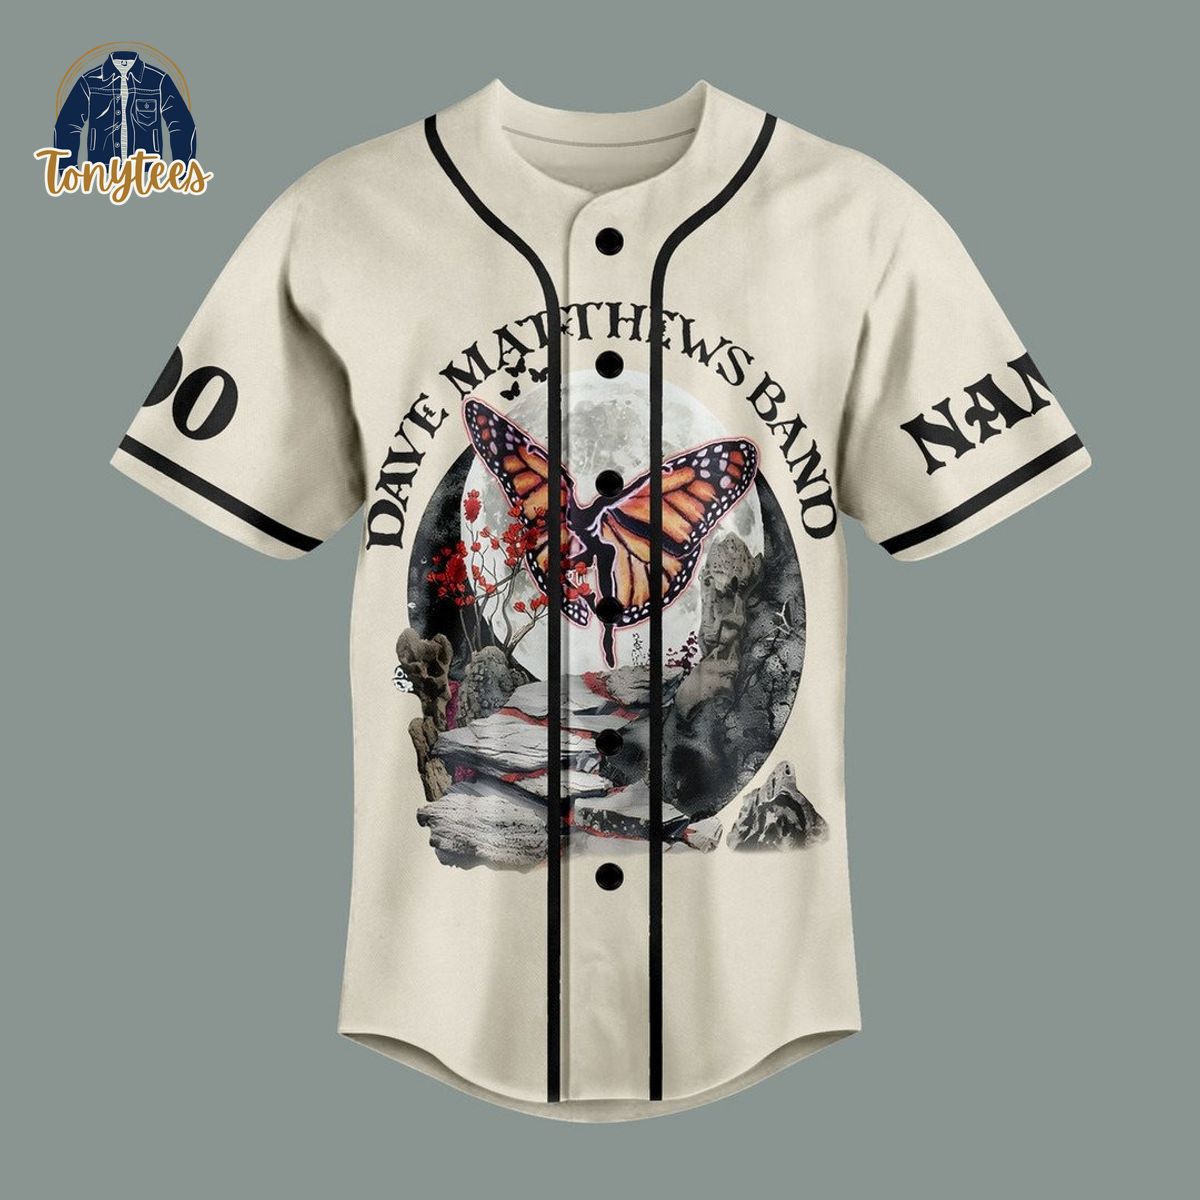 Personalized Dave Matthews Band Life is Short but Sweet for Certain Baseball Jersey